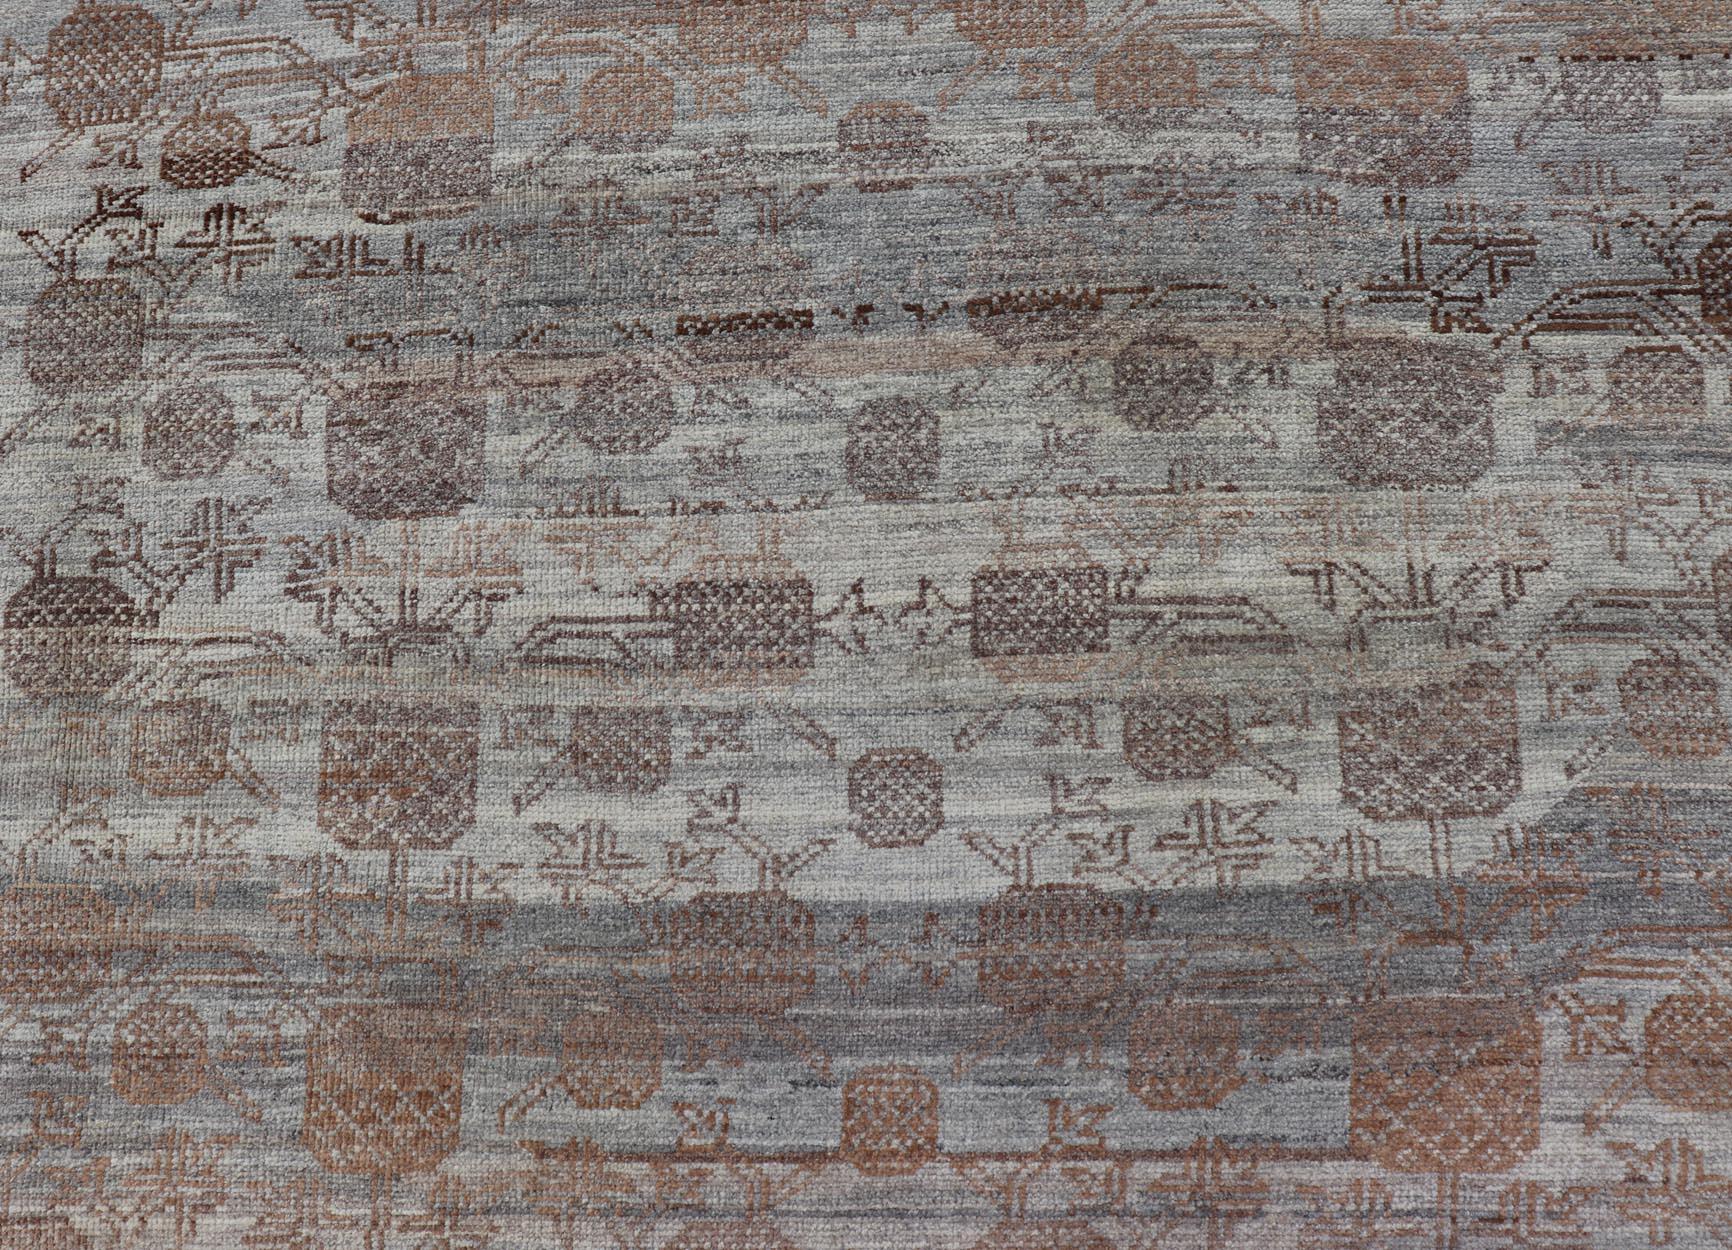 This modern casual tribal rug has been hand-knotted. The rug features a modern sub-geometric pomegranate design and is enclosed within a complementary, multi-tiered border, rendered in brown and gray tones; this rug is a superb fit for a variety of